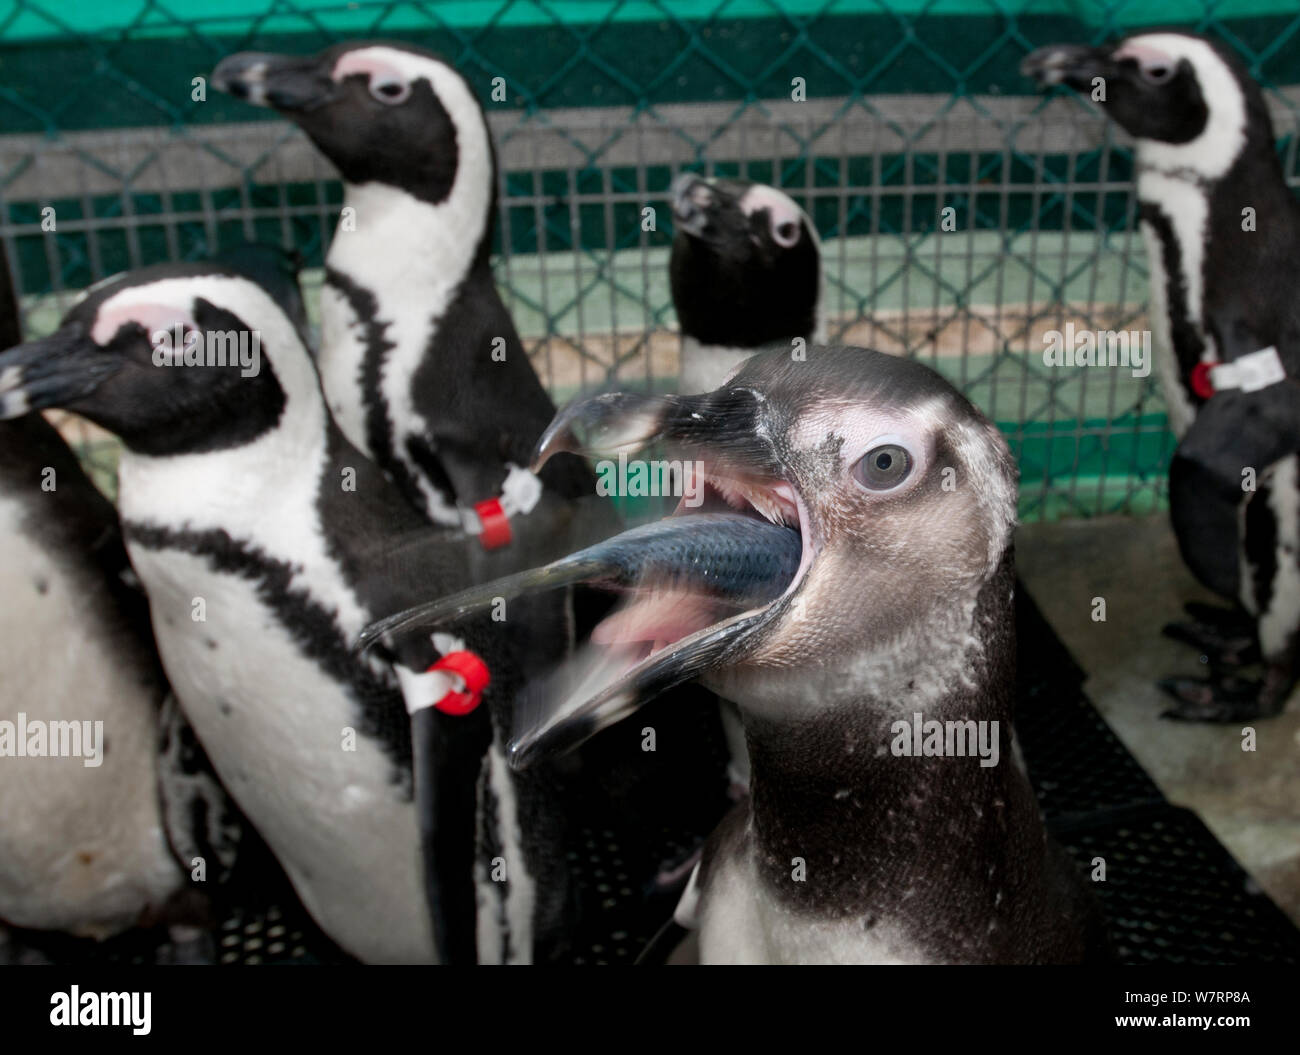 African penguin, (Spheniscus demersus) feeding on fish, during rehabilitation at Southern African Foundation for the Conservation of Coastal Birds (SANCCOB), Cape Town, South Africa. Stock Photo